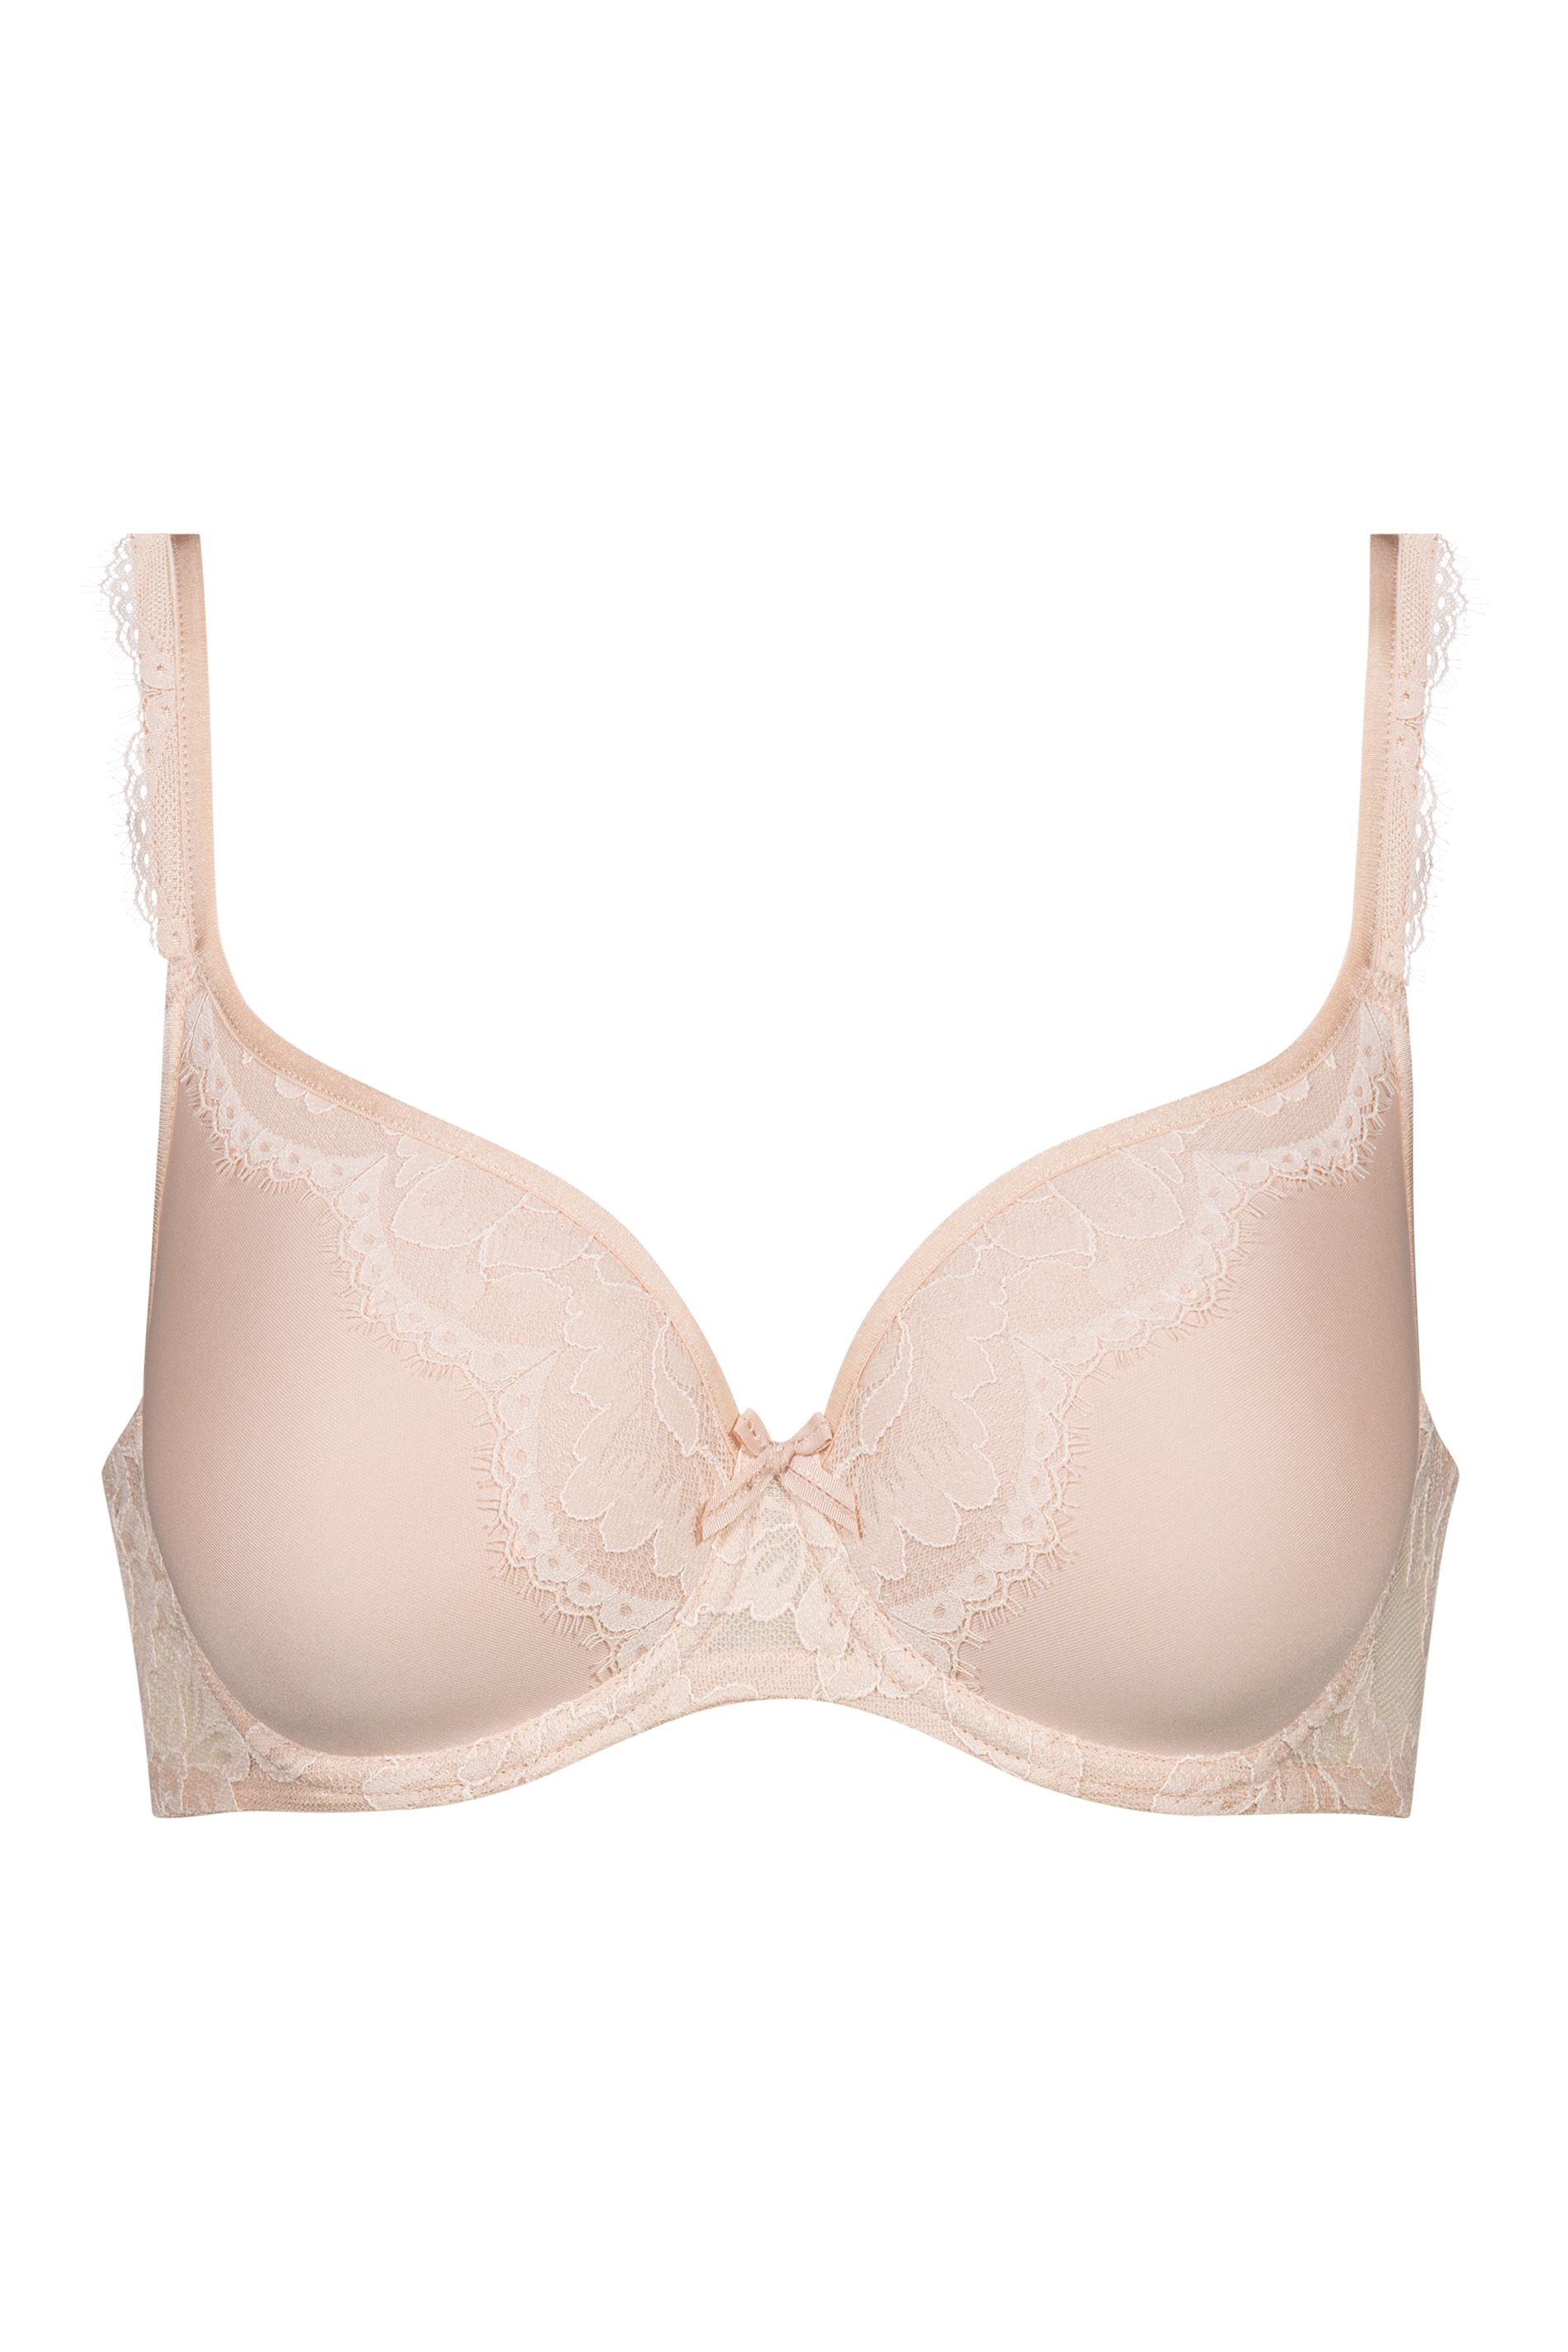 Spacer bra | Full Cup Blossom Serie Amazing Cut Out | mey®